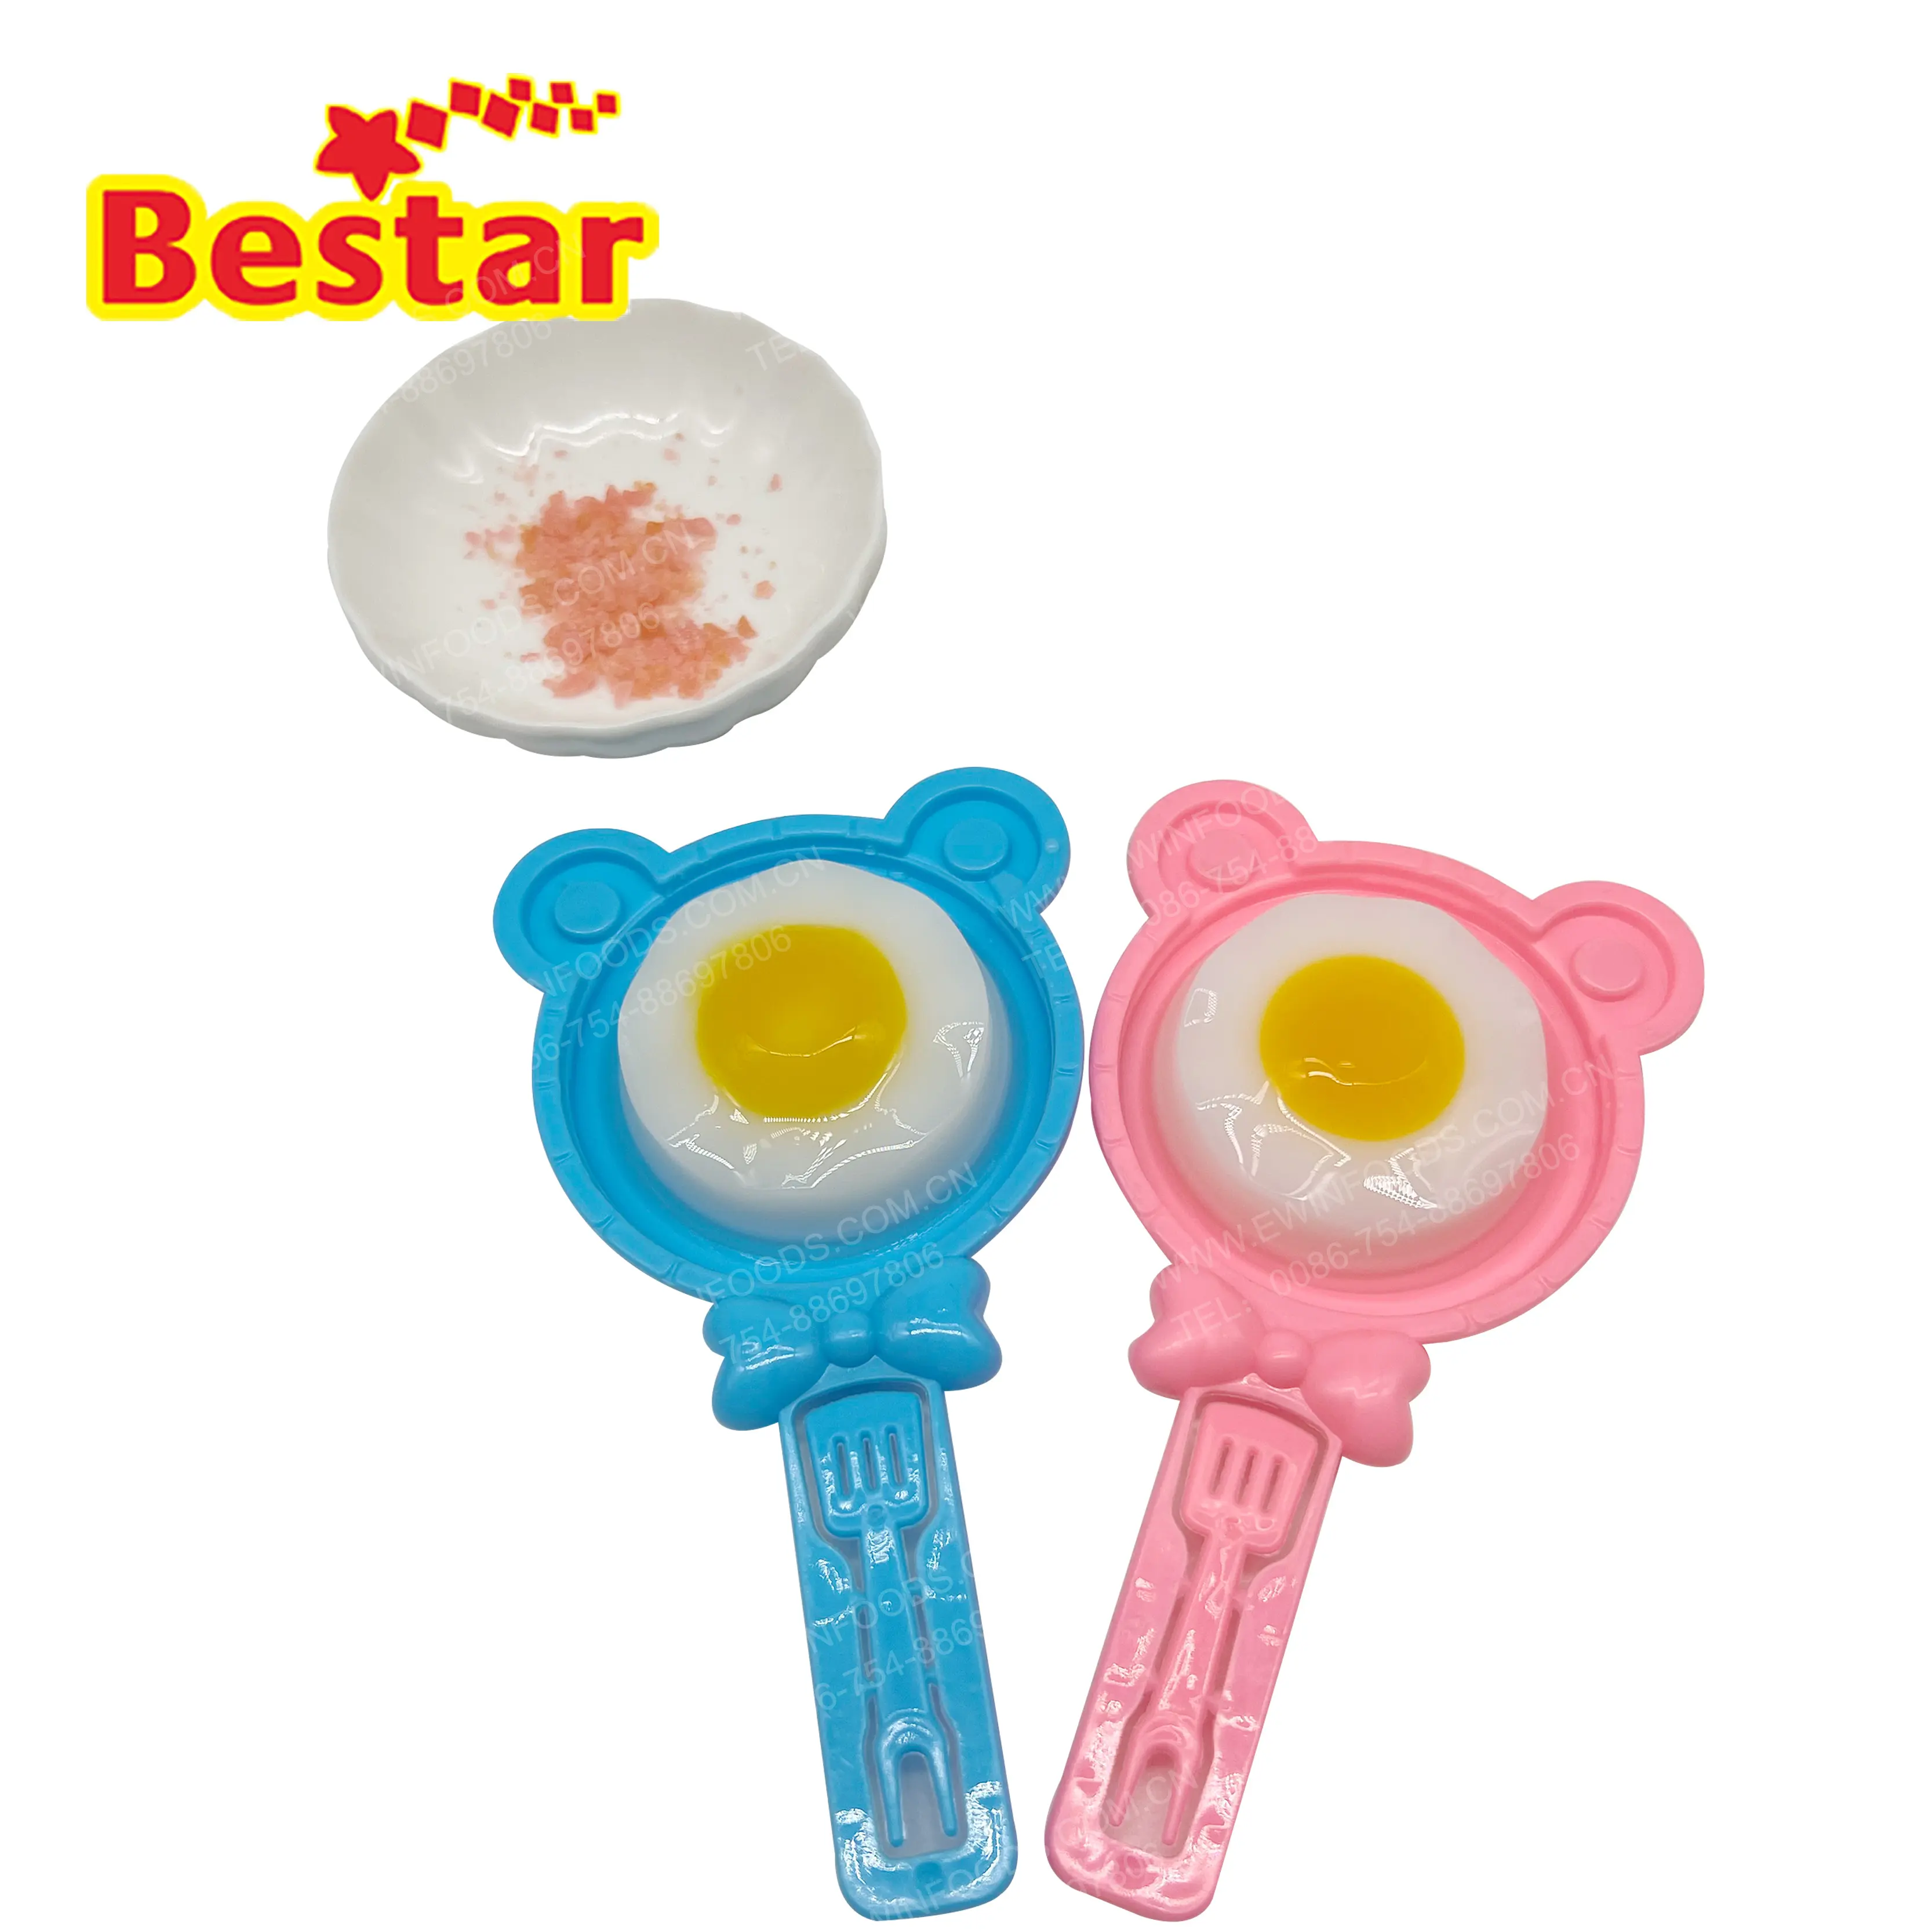 Egg soft candy wholesale funny bear shape egg gummy jelly kitchen candy toys for kids custom design and logo candy supplier